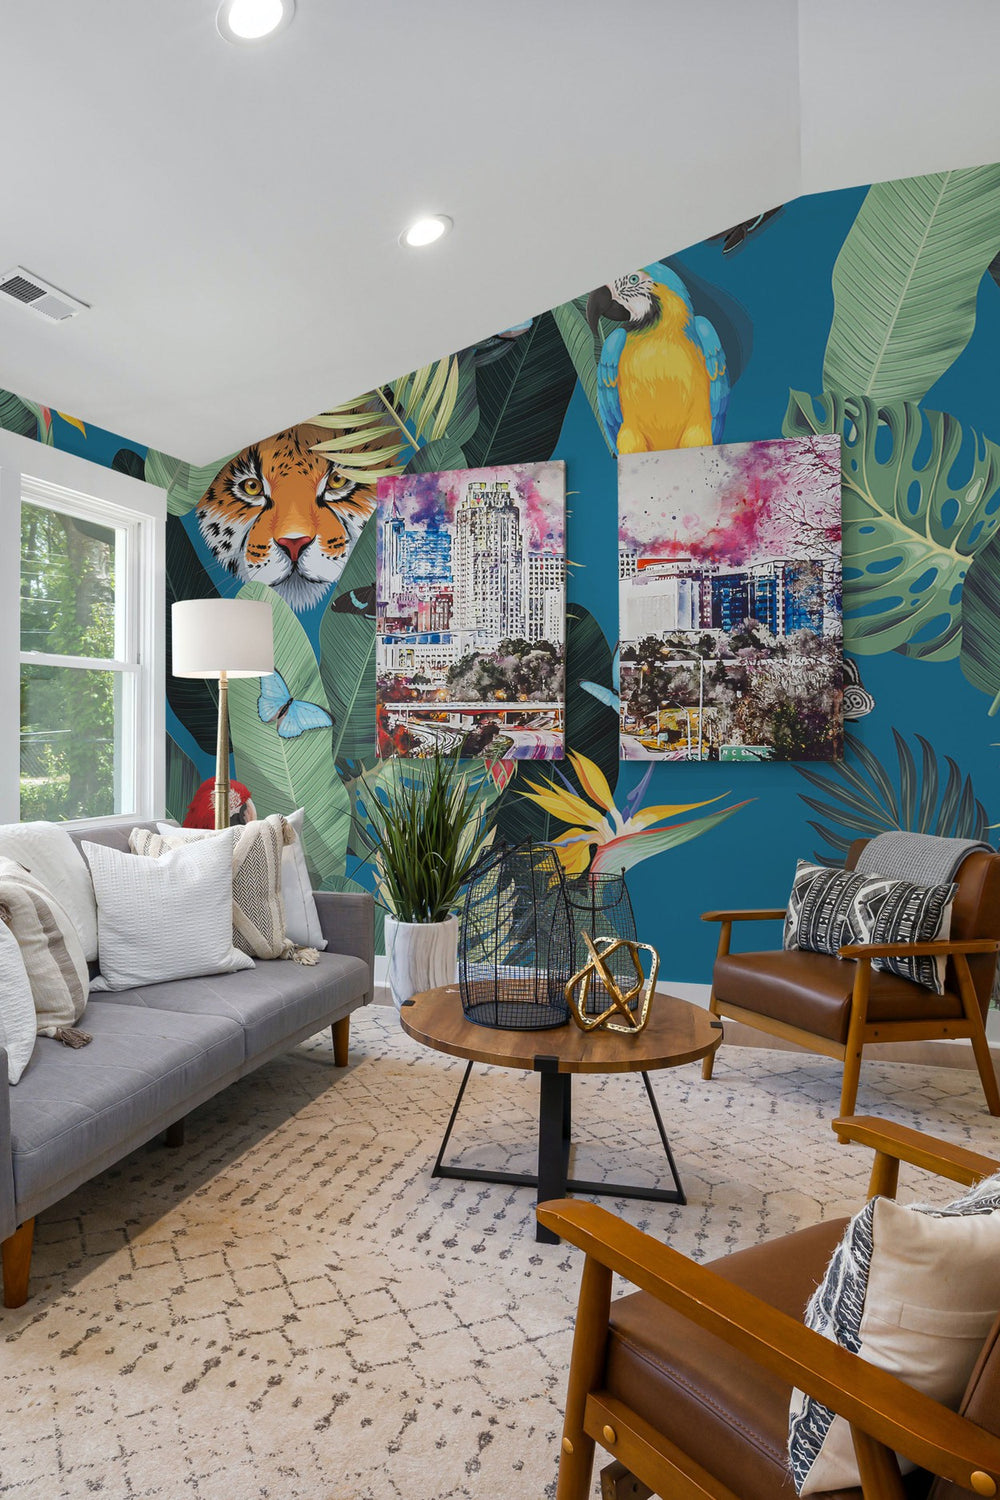 A vibrant living room with a tropical jungle wall mural featuring exotic animals and colorful collage-style urban artwork.